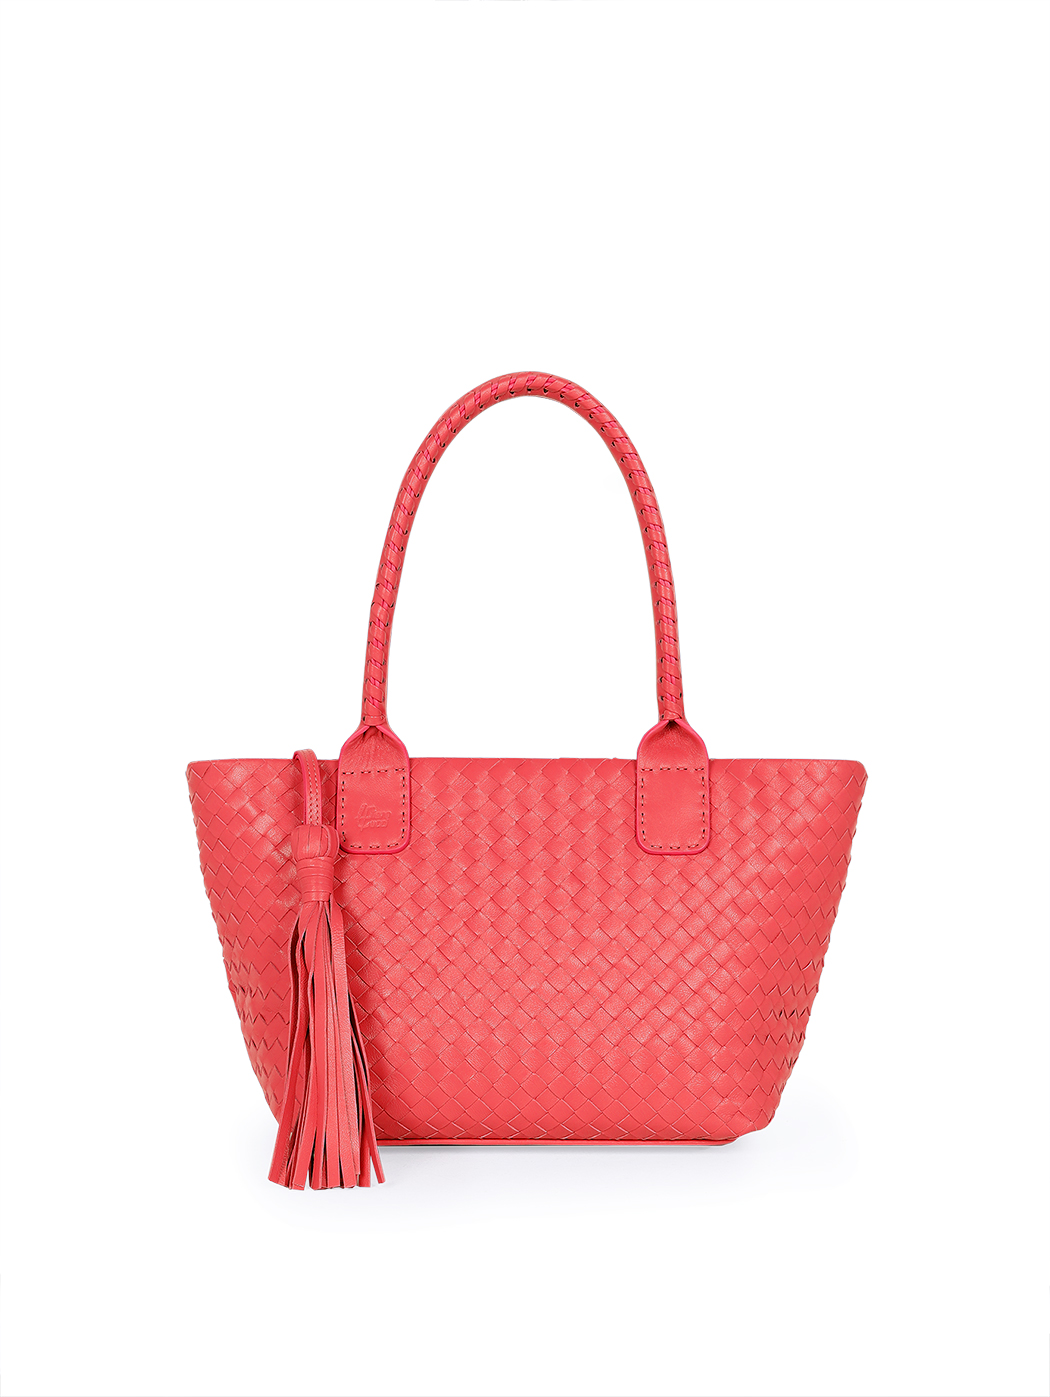 Medium Top Handle Woven Leather Shoulder Tote Red